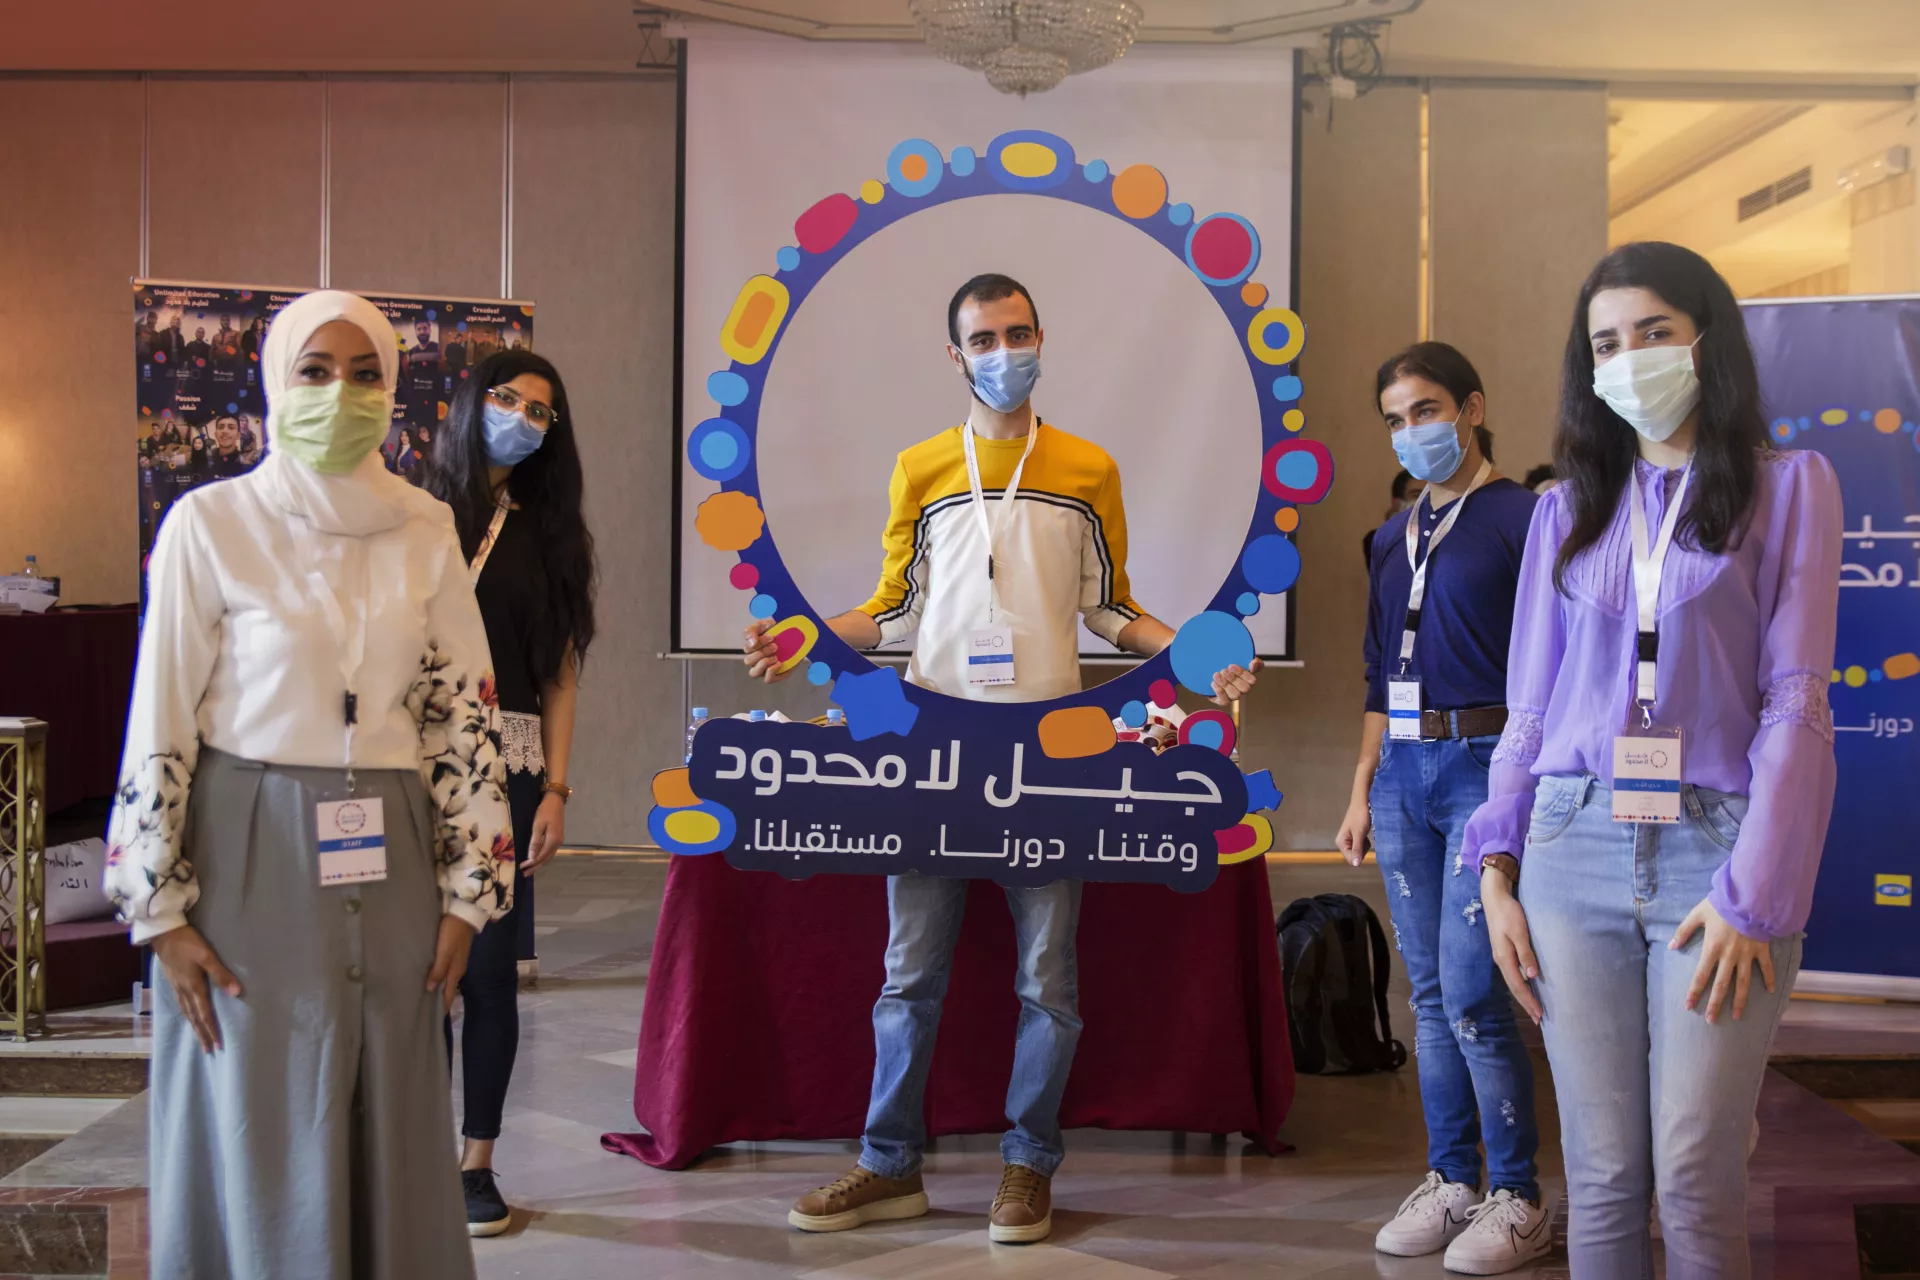 Members of the CreaDeaf team during the Generation Unlimited Youth Challenge in Damascus, Syria.